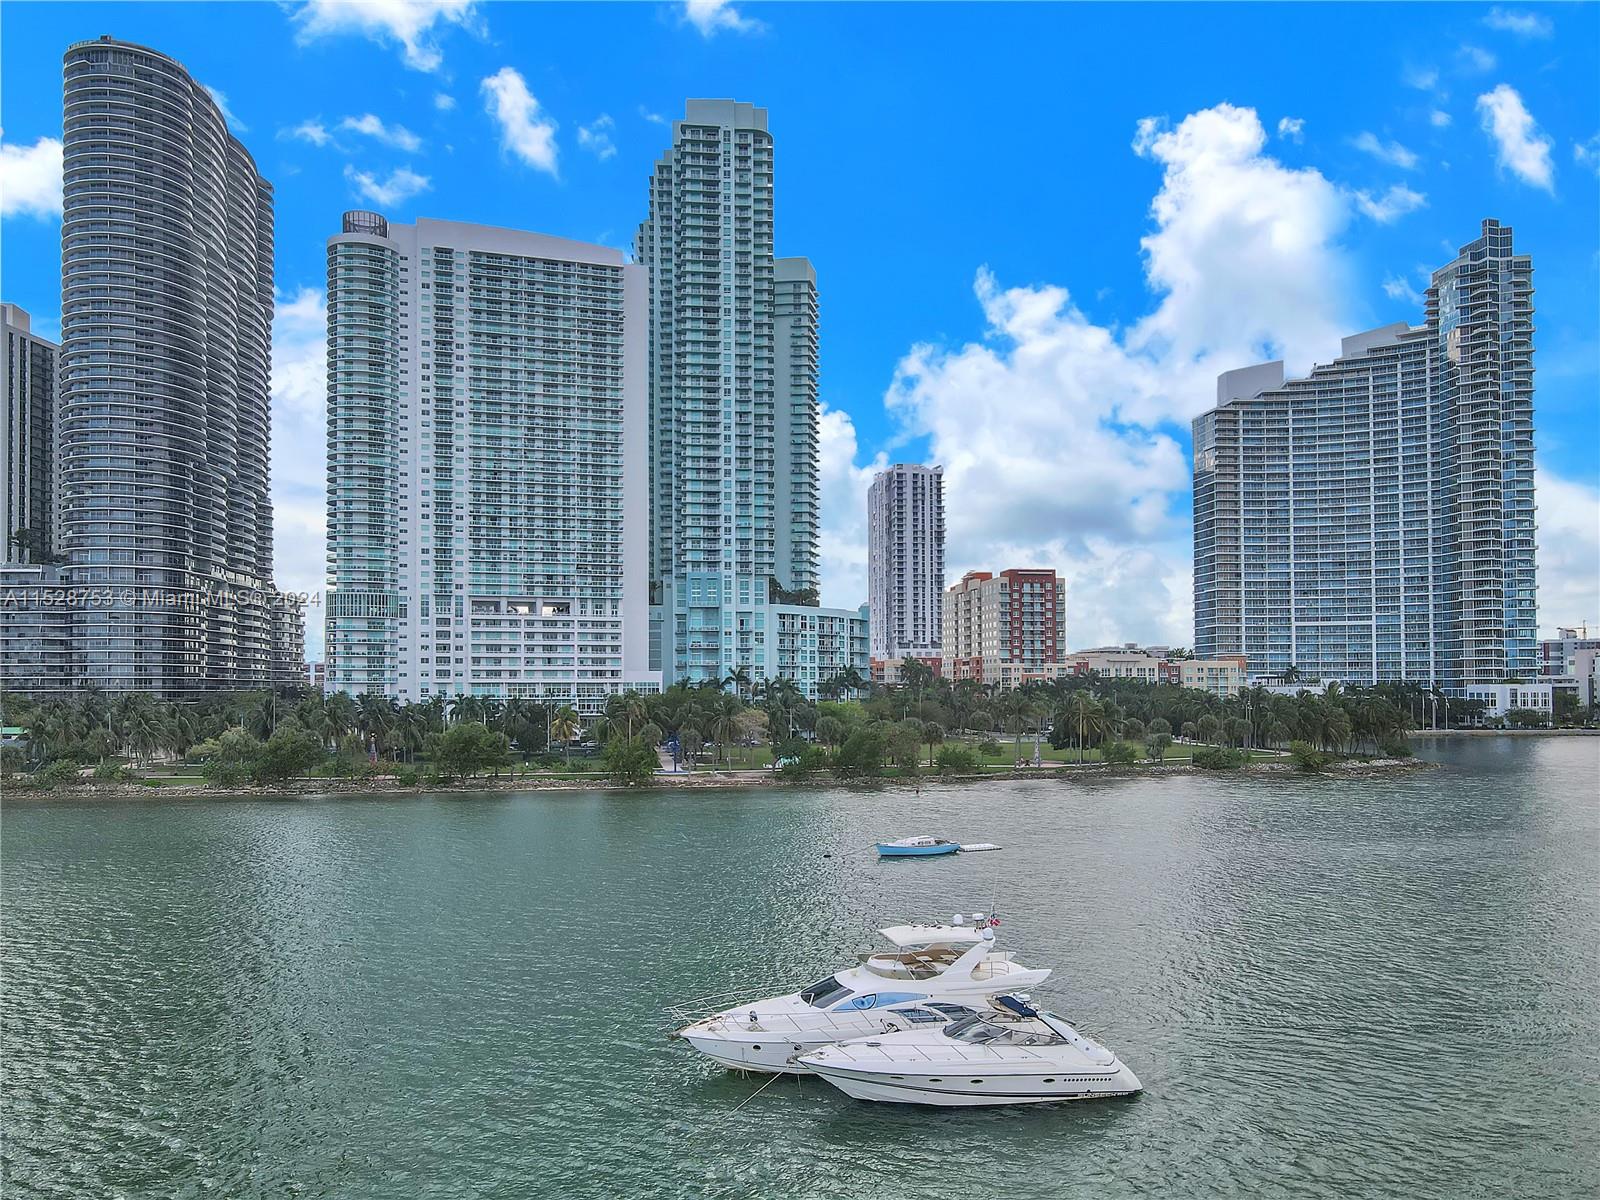 Incredible 1 bedroom, 1 bathroom apartment with views of the bay, in Quantum on the Bay. This building offers a
variety of amenities, including a well-equipped fitness center, pool, 24-hour security, valet services, and an
oversized party room for your enjoyment. Excellent location in Miami's rapidly developing Edgewater
neighborhood, situated across from Margaret Park and close to downtown Miami, Brickell, Wynwood, restaurants,
supermarkets, Midtown Mall, and more. Easy access to Miami Beach, the airport, and major highways. Vacant
unit, easy to visit.